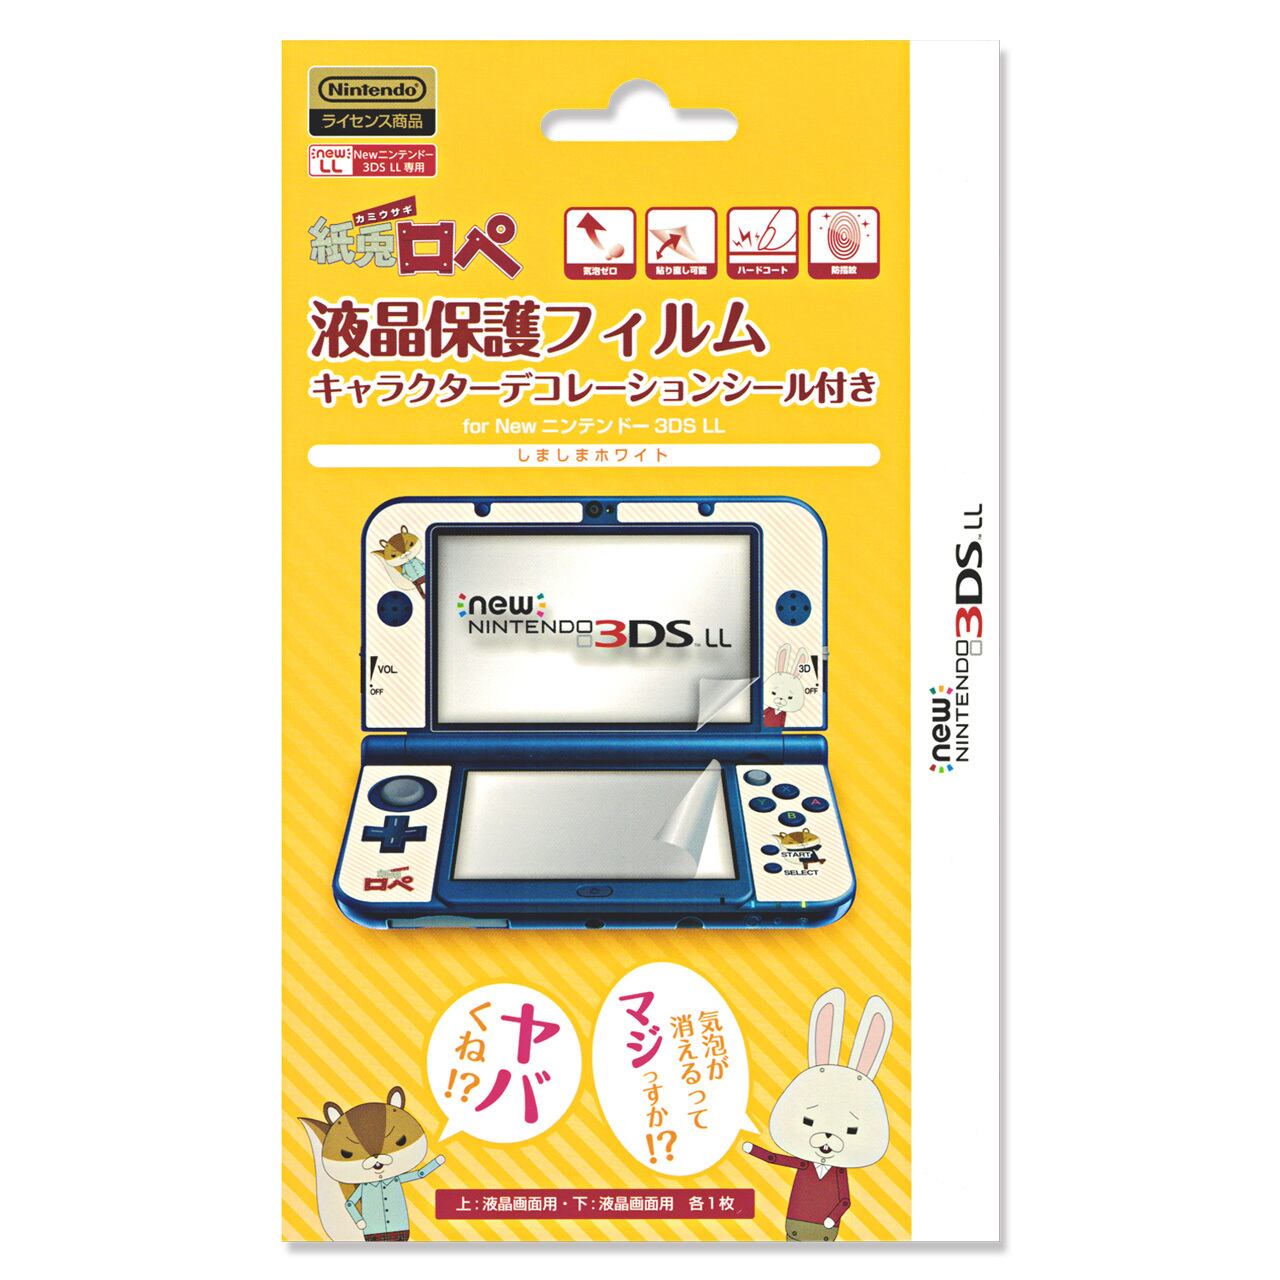 new Nintendo 3DS LL 保護フィルム付き